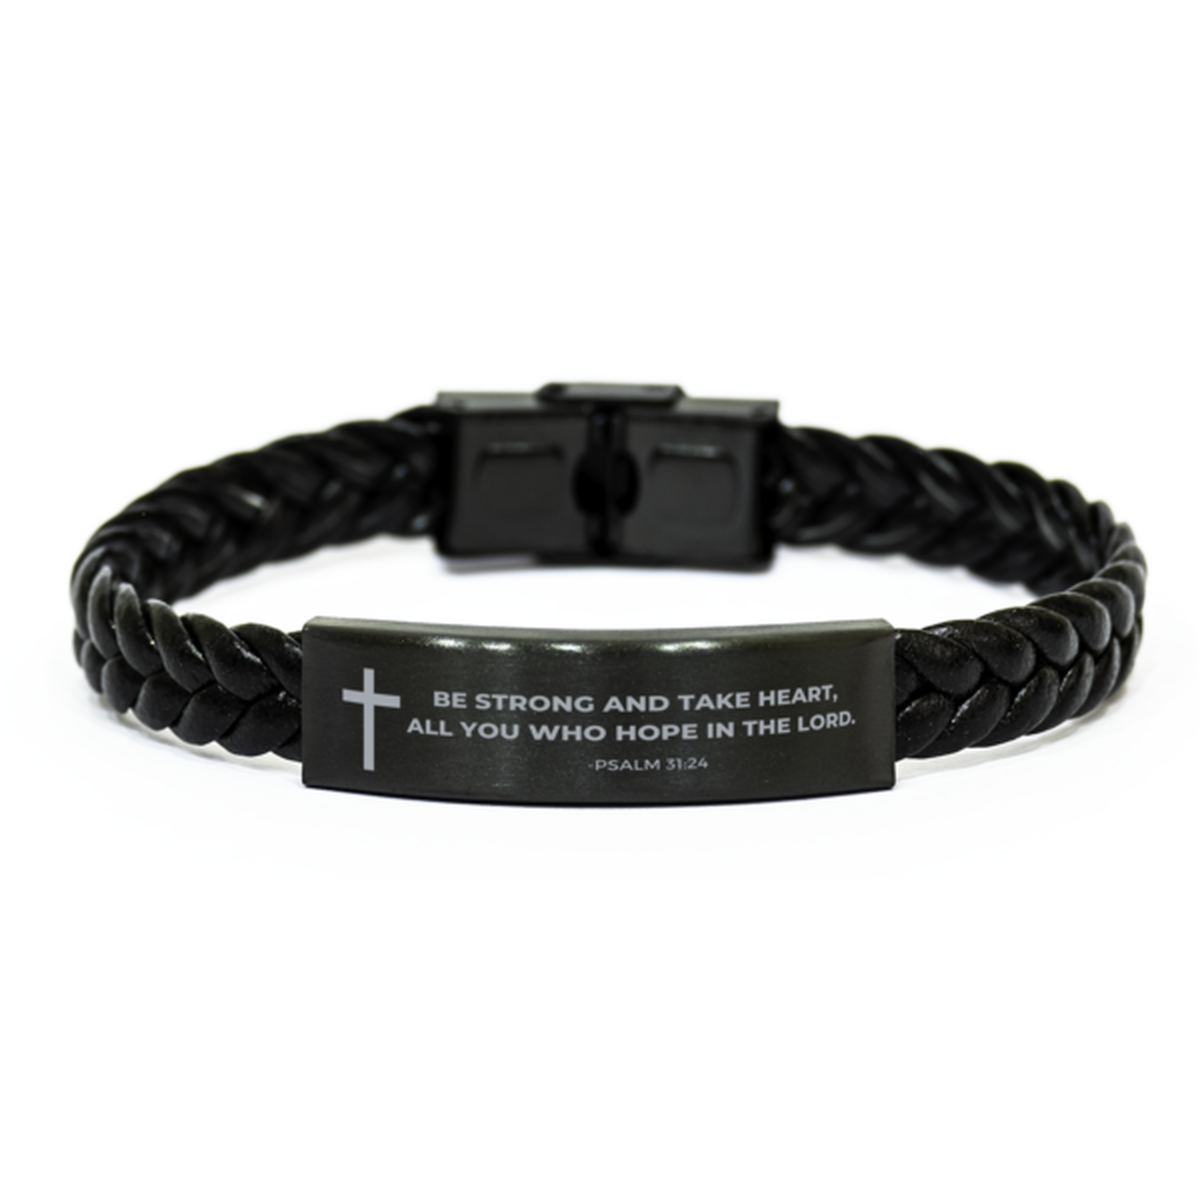 Baptism Gifts For Teenage Boys Girls, Christian Bible Verse Braided Leather Bracelet, Be strong and take heart, Catholic Confirmation Gifts for Son, Godson, Grandson, Nephew